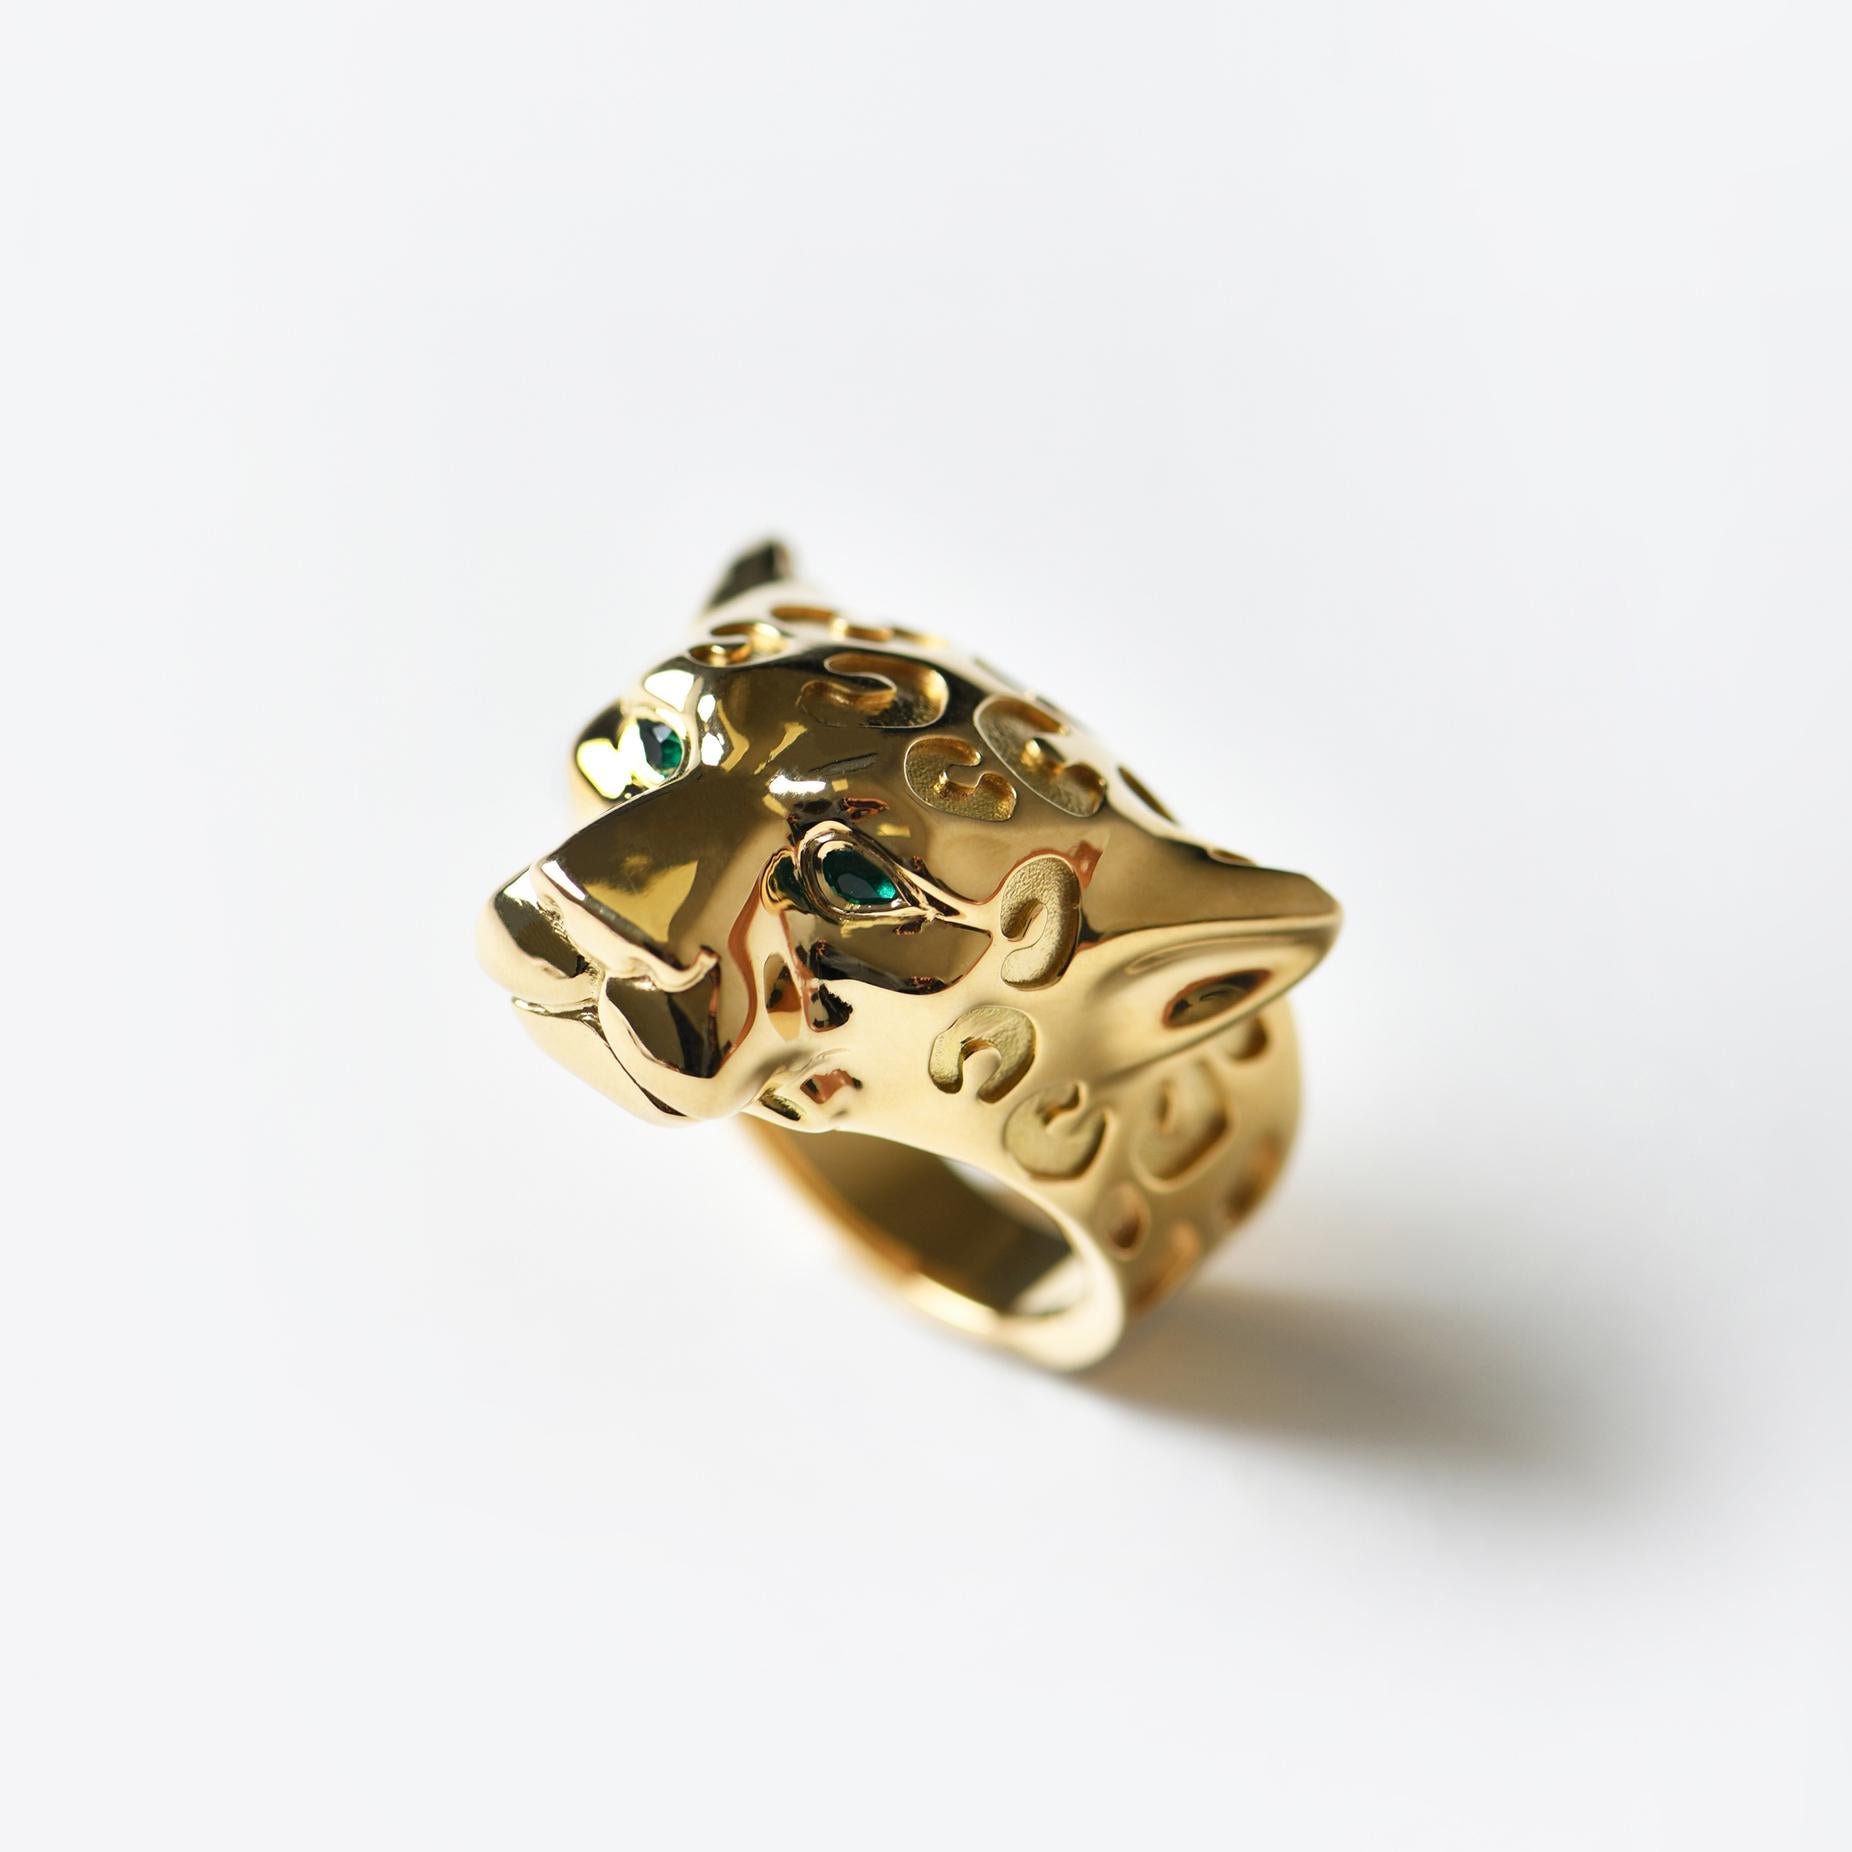 Brilliant Cut 18K Yellow Gold Jaguar Ring by Tane For Sale